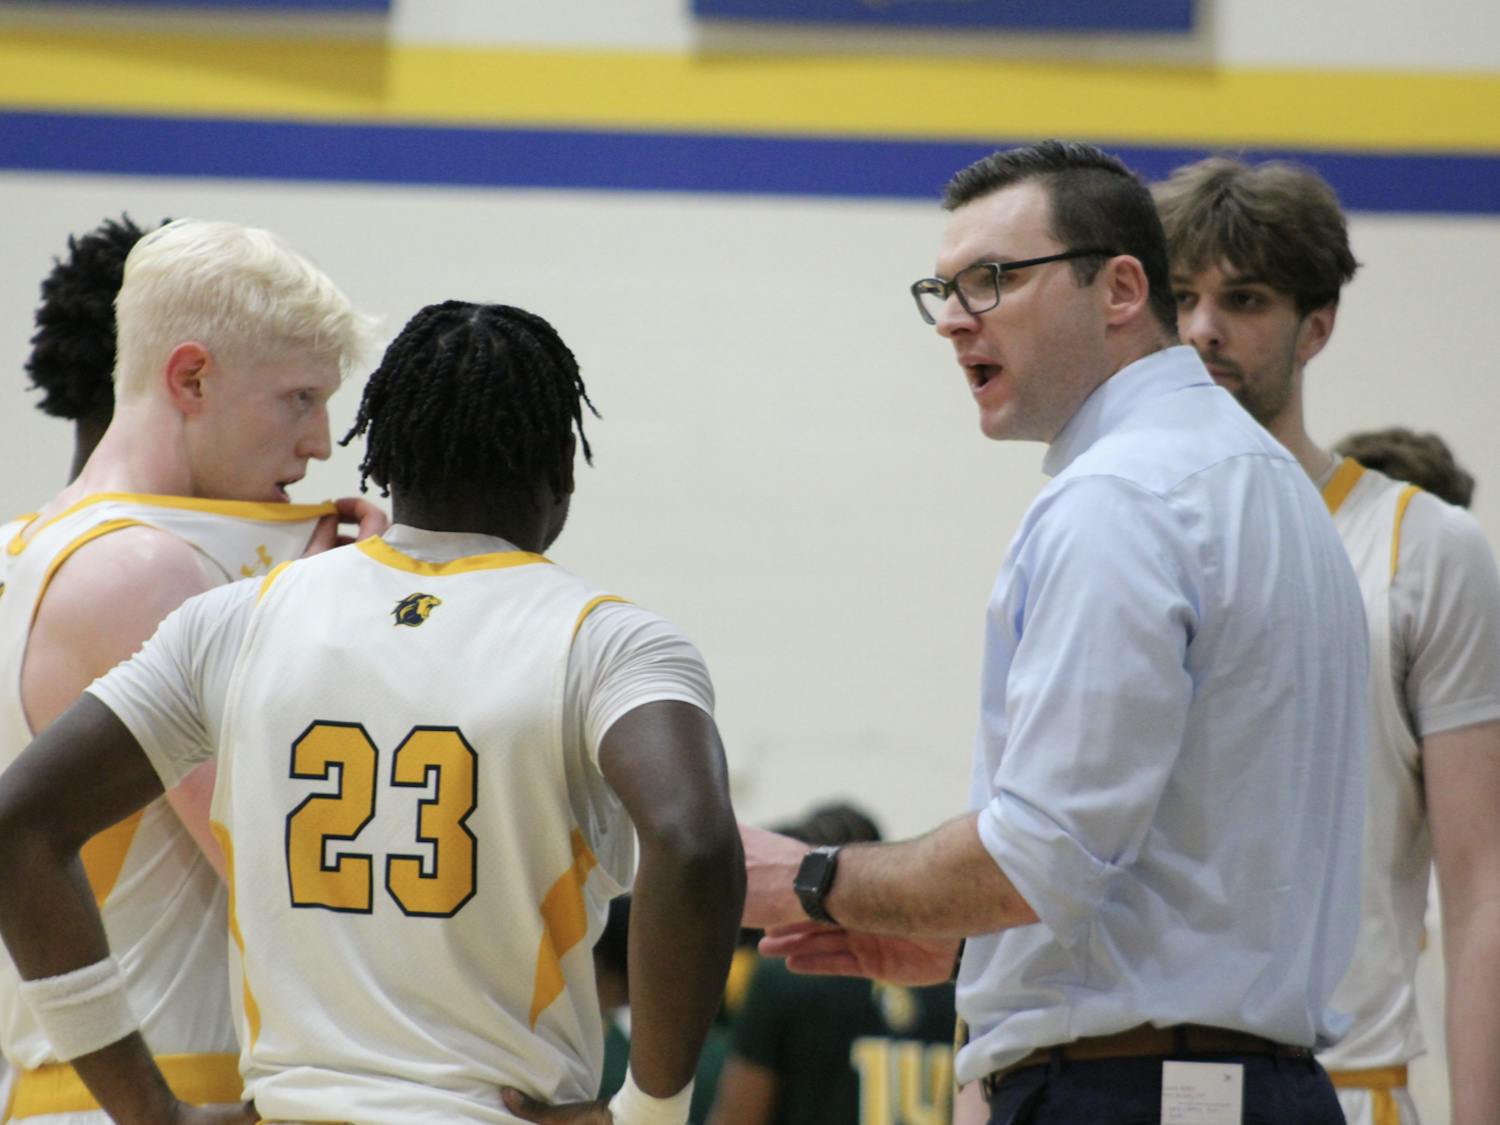 Coach Goldsmith urging his team on in a timeout (Photo courtesy of Elizabeth Gladstone / Multimedia Coordinator).